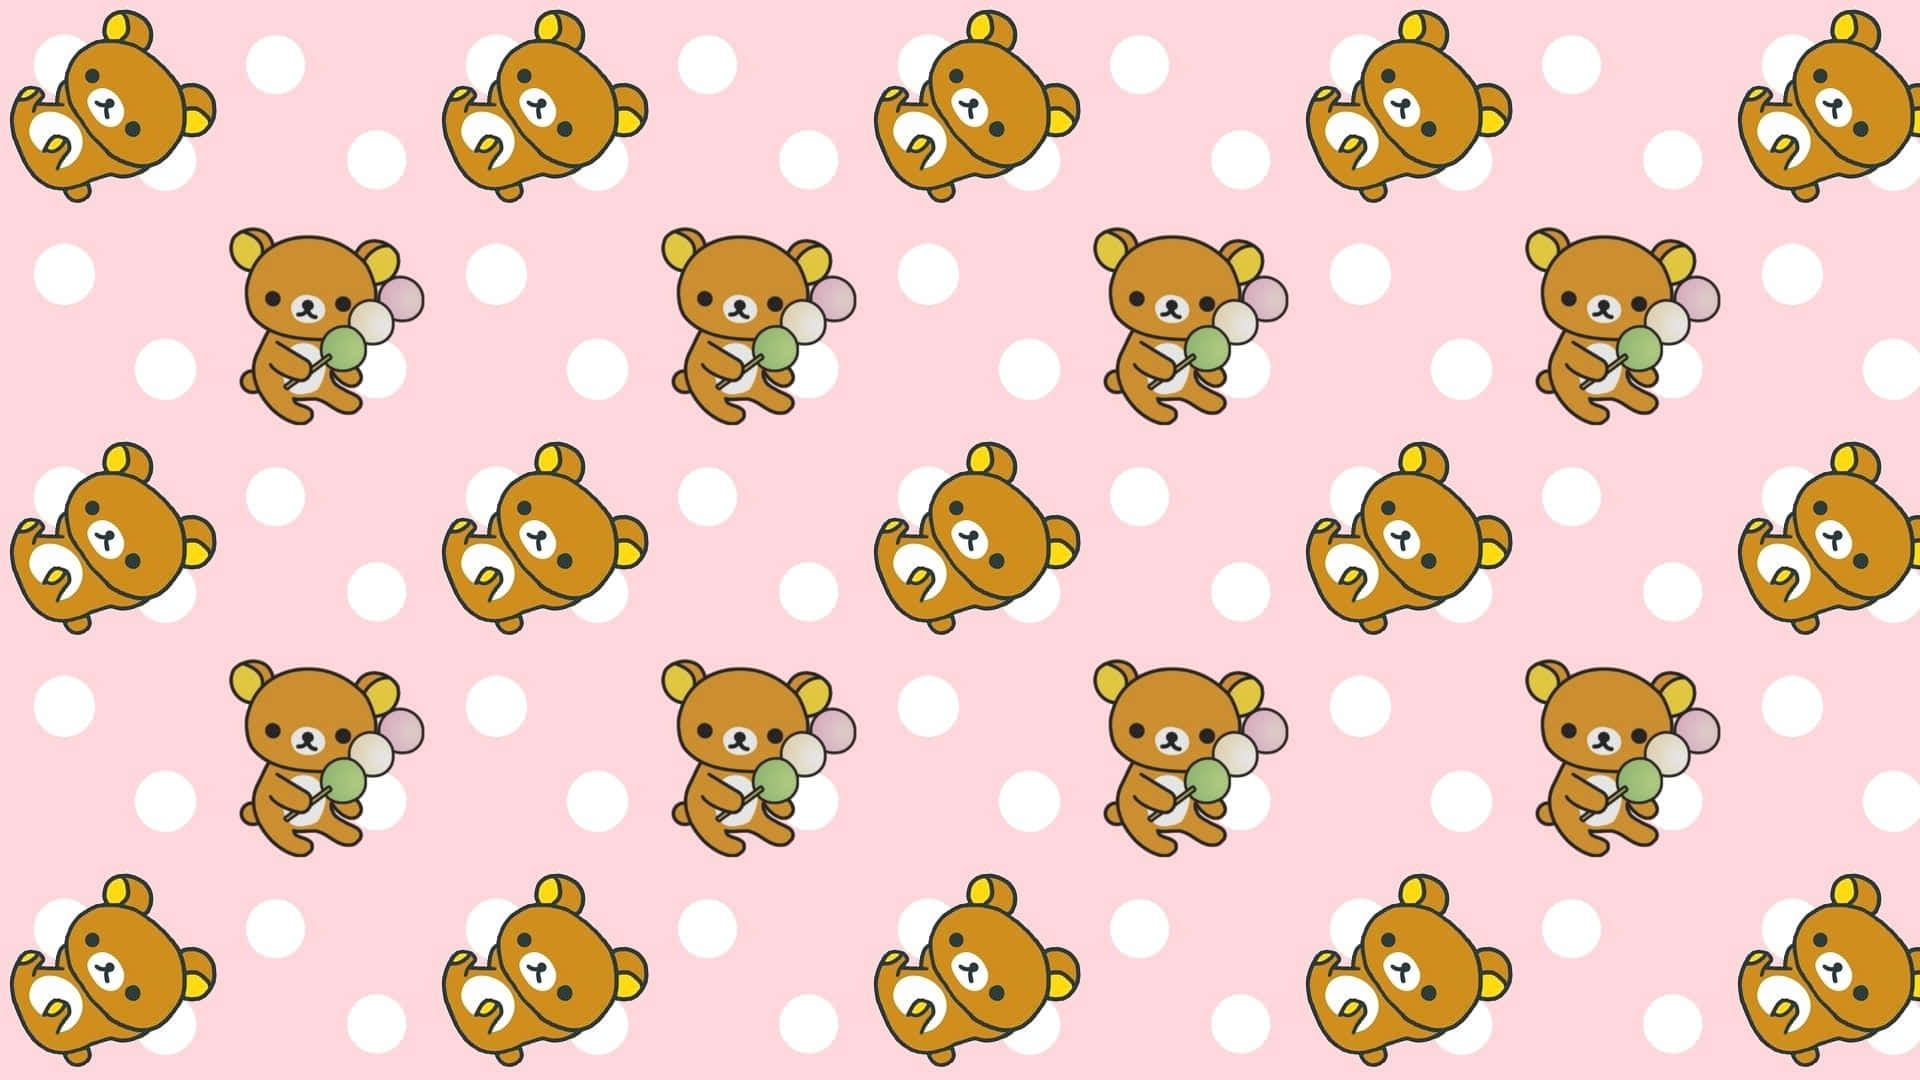 Get your daily dose of cuteness and kawaii vibes with this fluffy pink background.